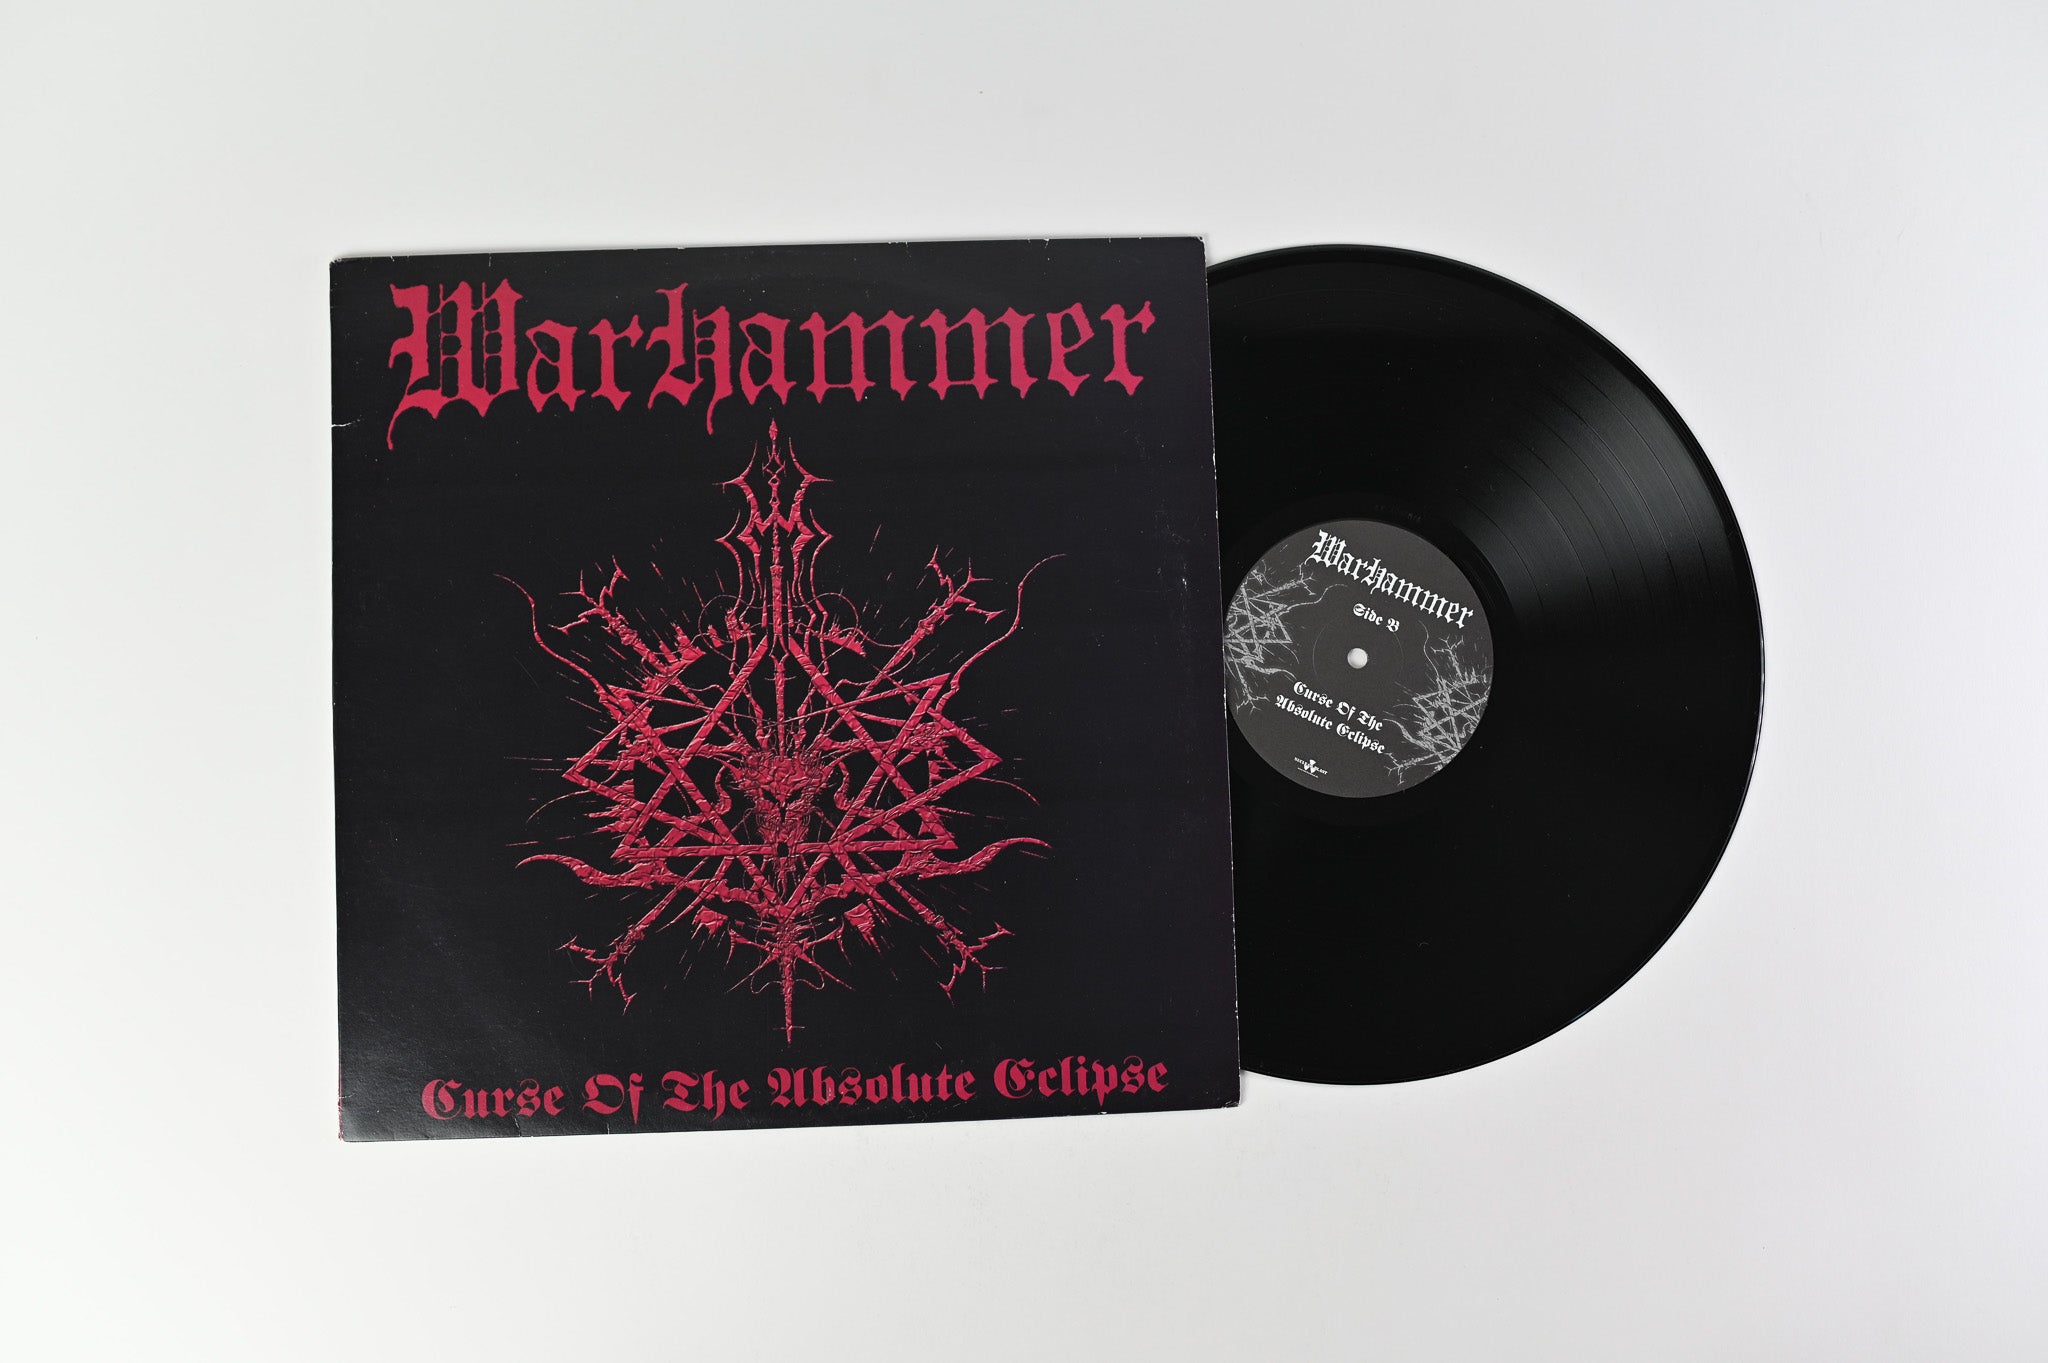 Warhammer - Curse Of The Absolute Eclipse on Nuclear Blast Ltd Numbered